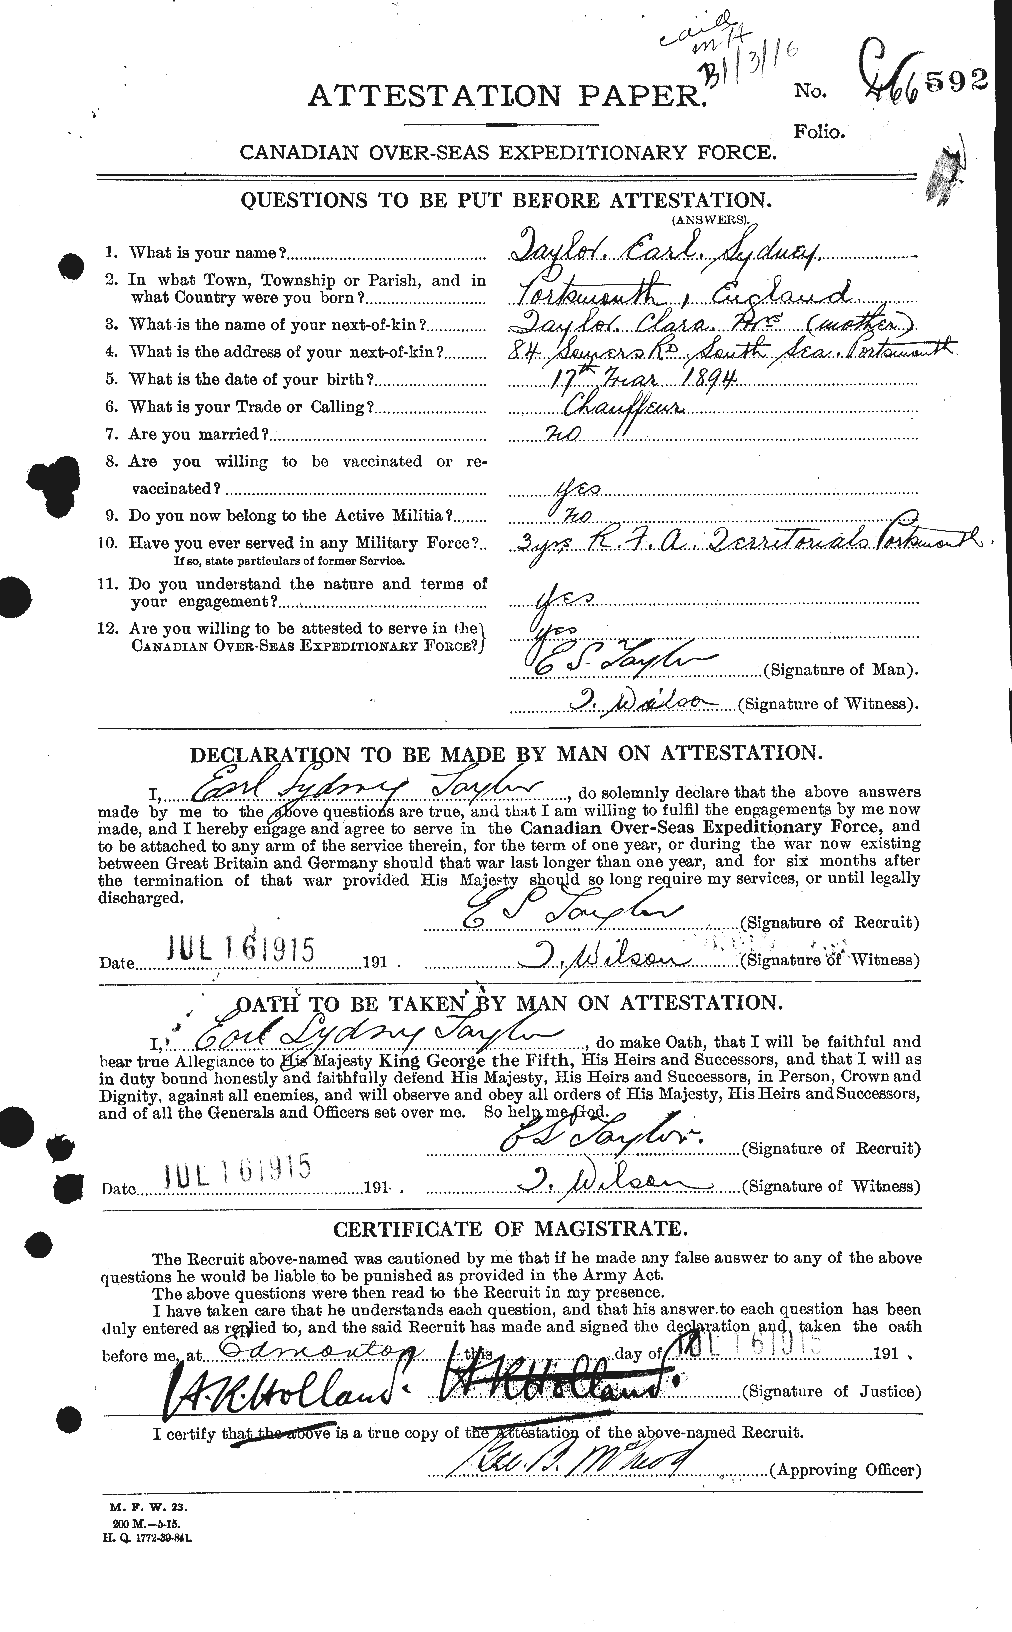 Personnel Records of the First World War - CEF 627267a